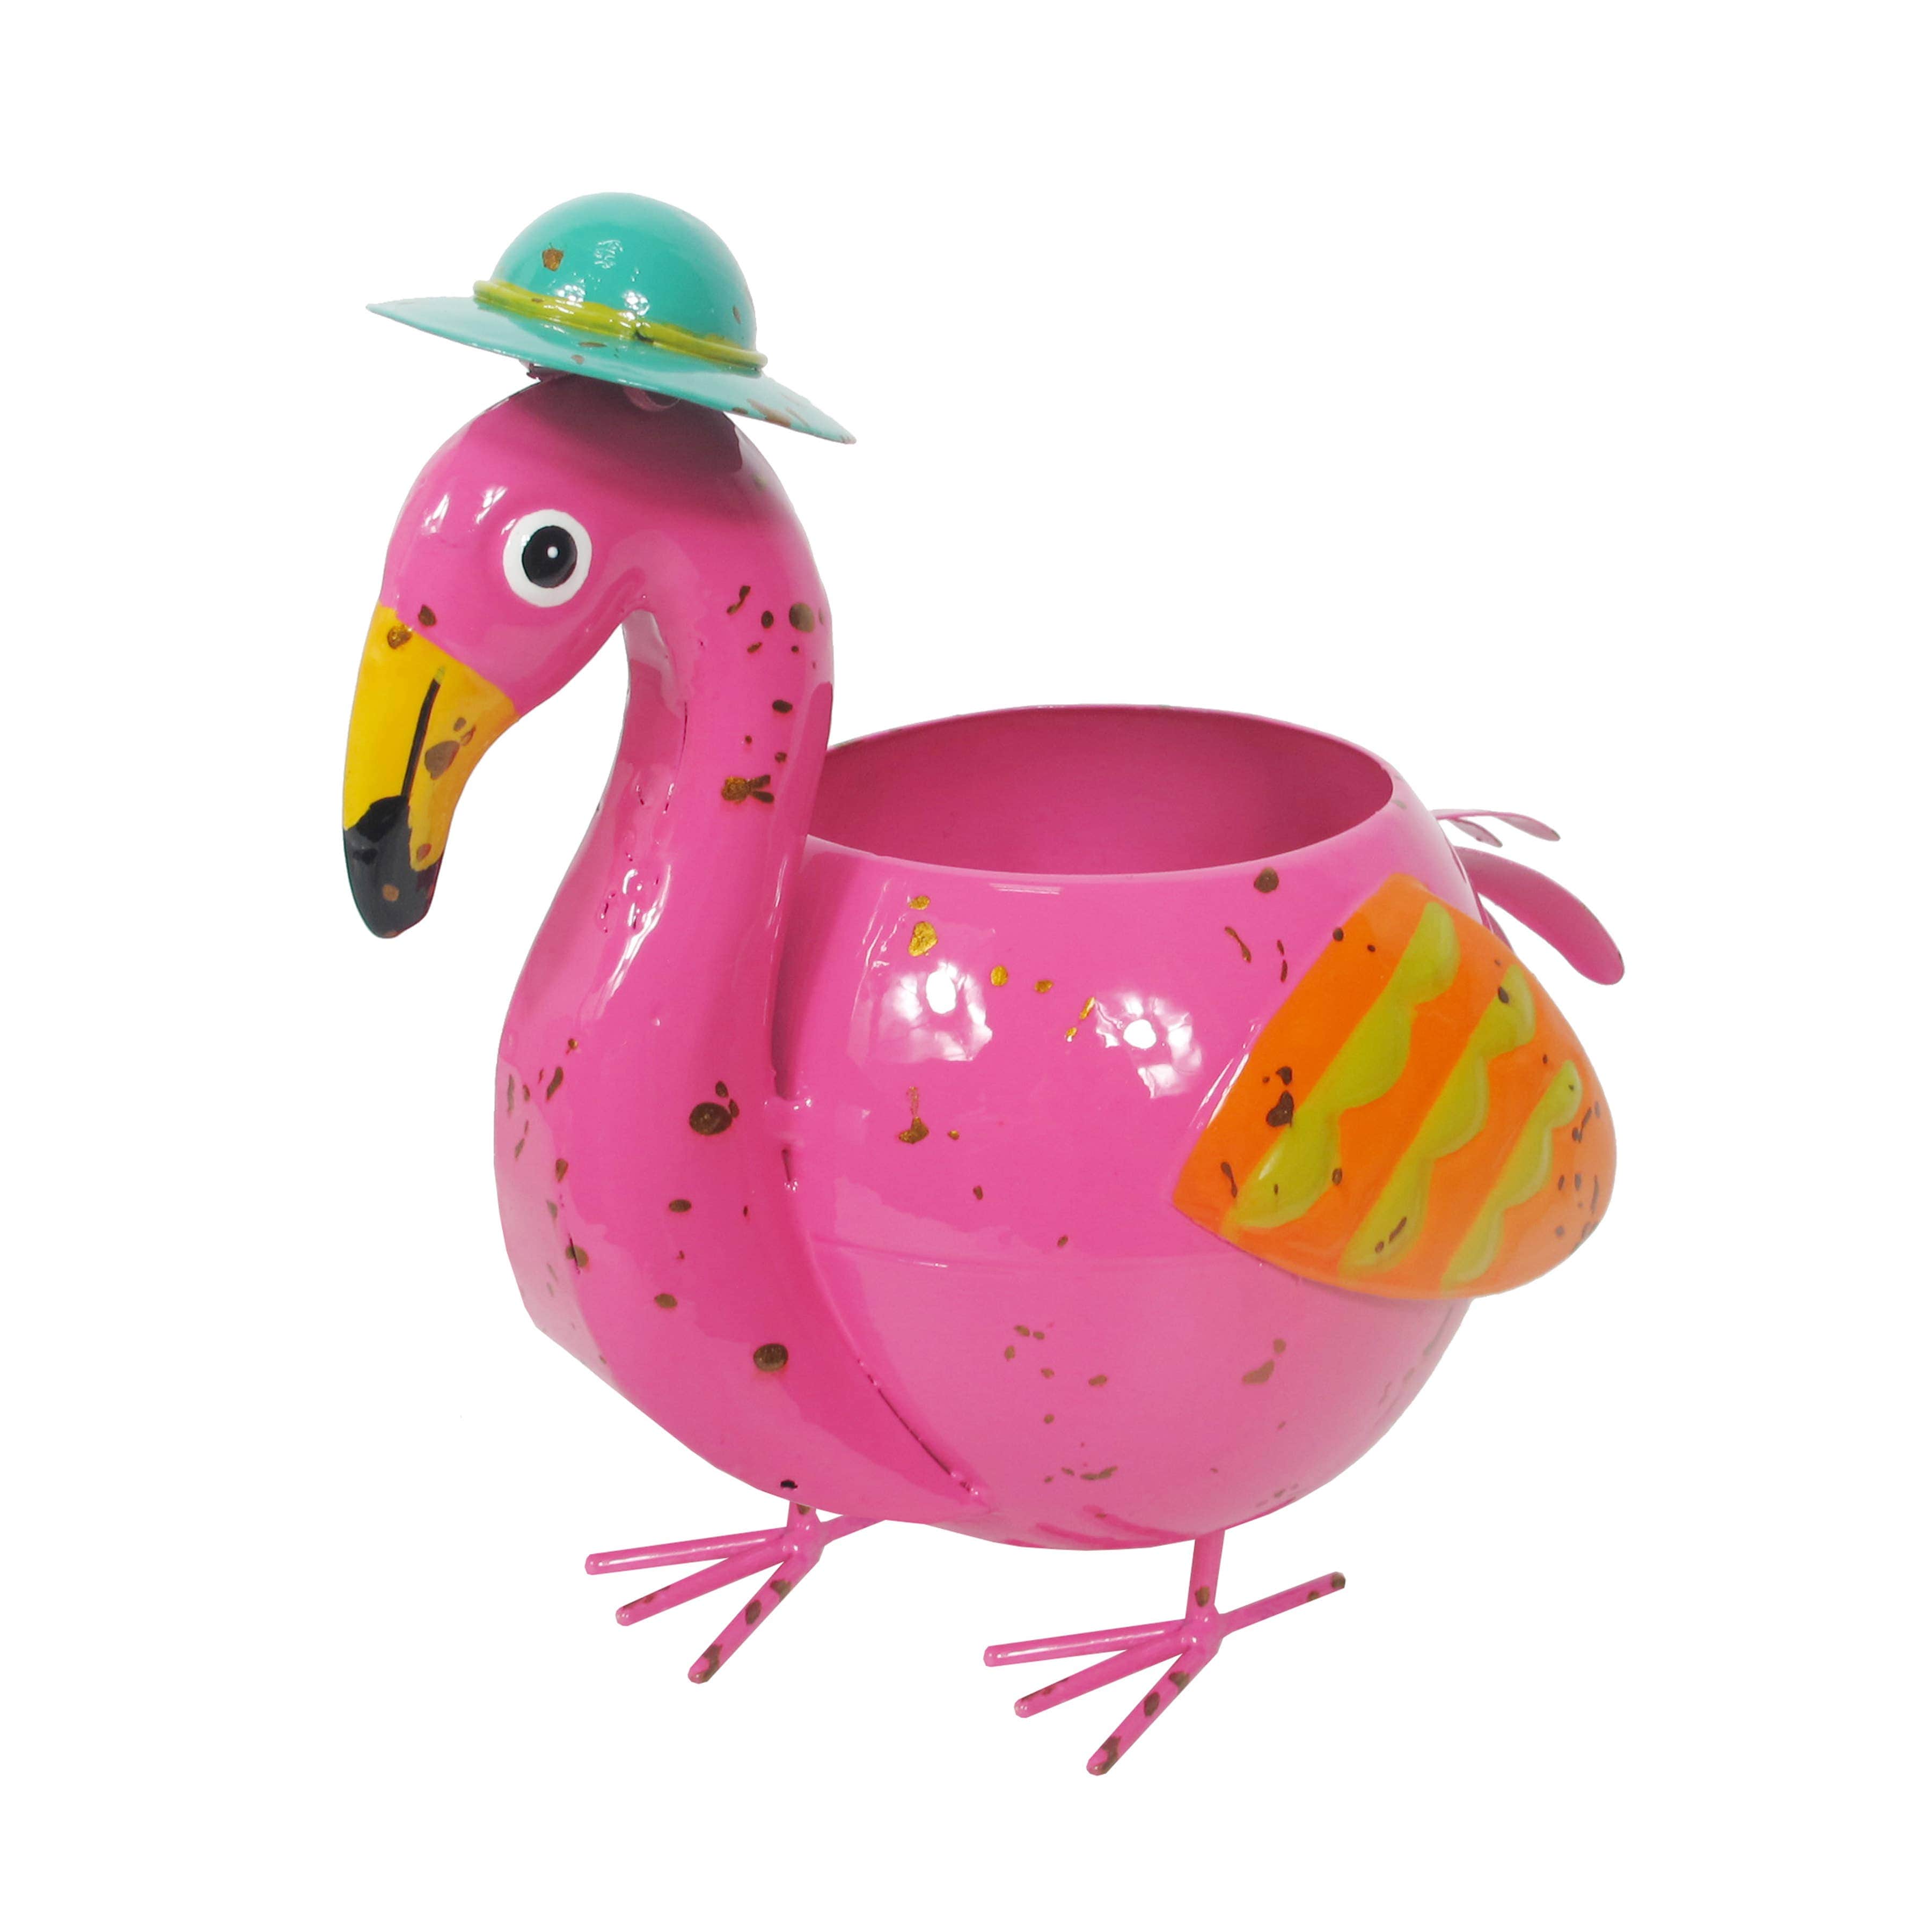 Mini Flamingo Planter-Indoor/Outdoor, Colorful Enamel Paint - The Pink Pigs, Animal Lover's Boutique